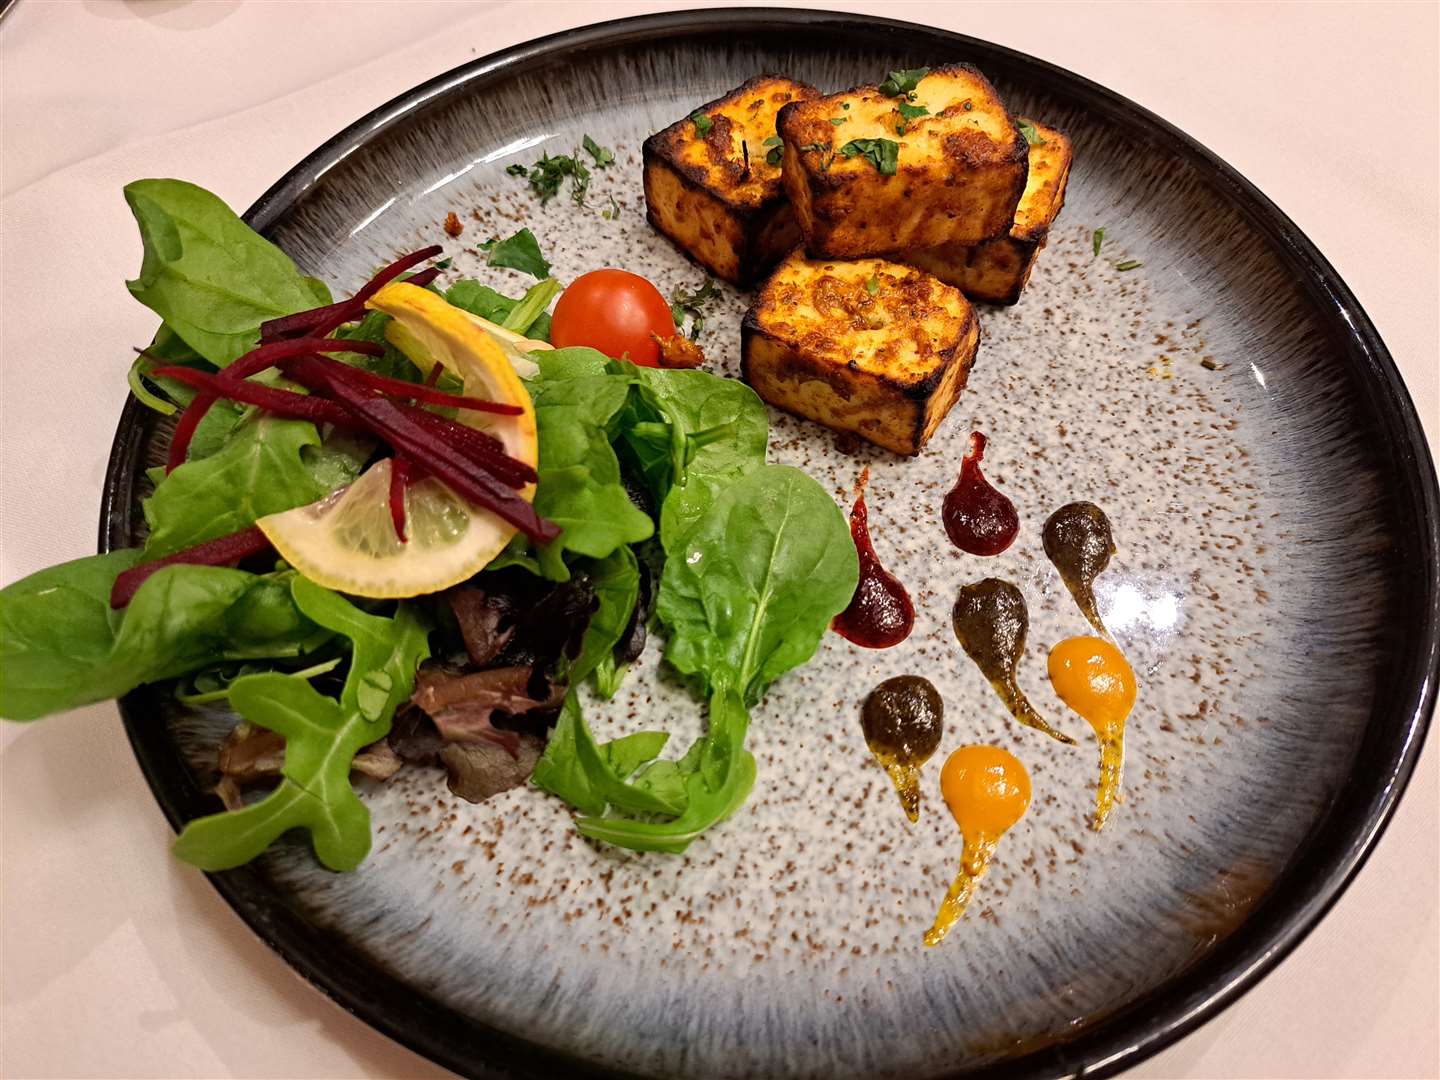 Achari Paneer Tikka, Indian homemade cheese marinated in tamarind, herbs and spices got things off to a tasty start